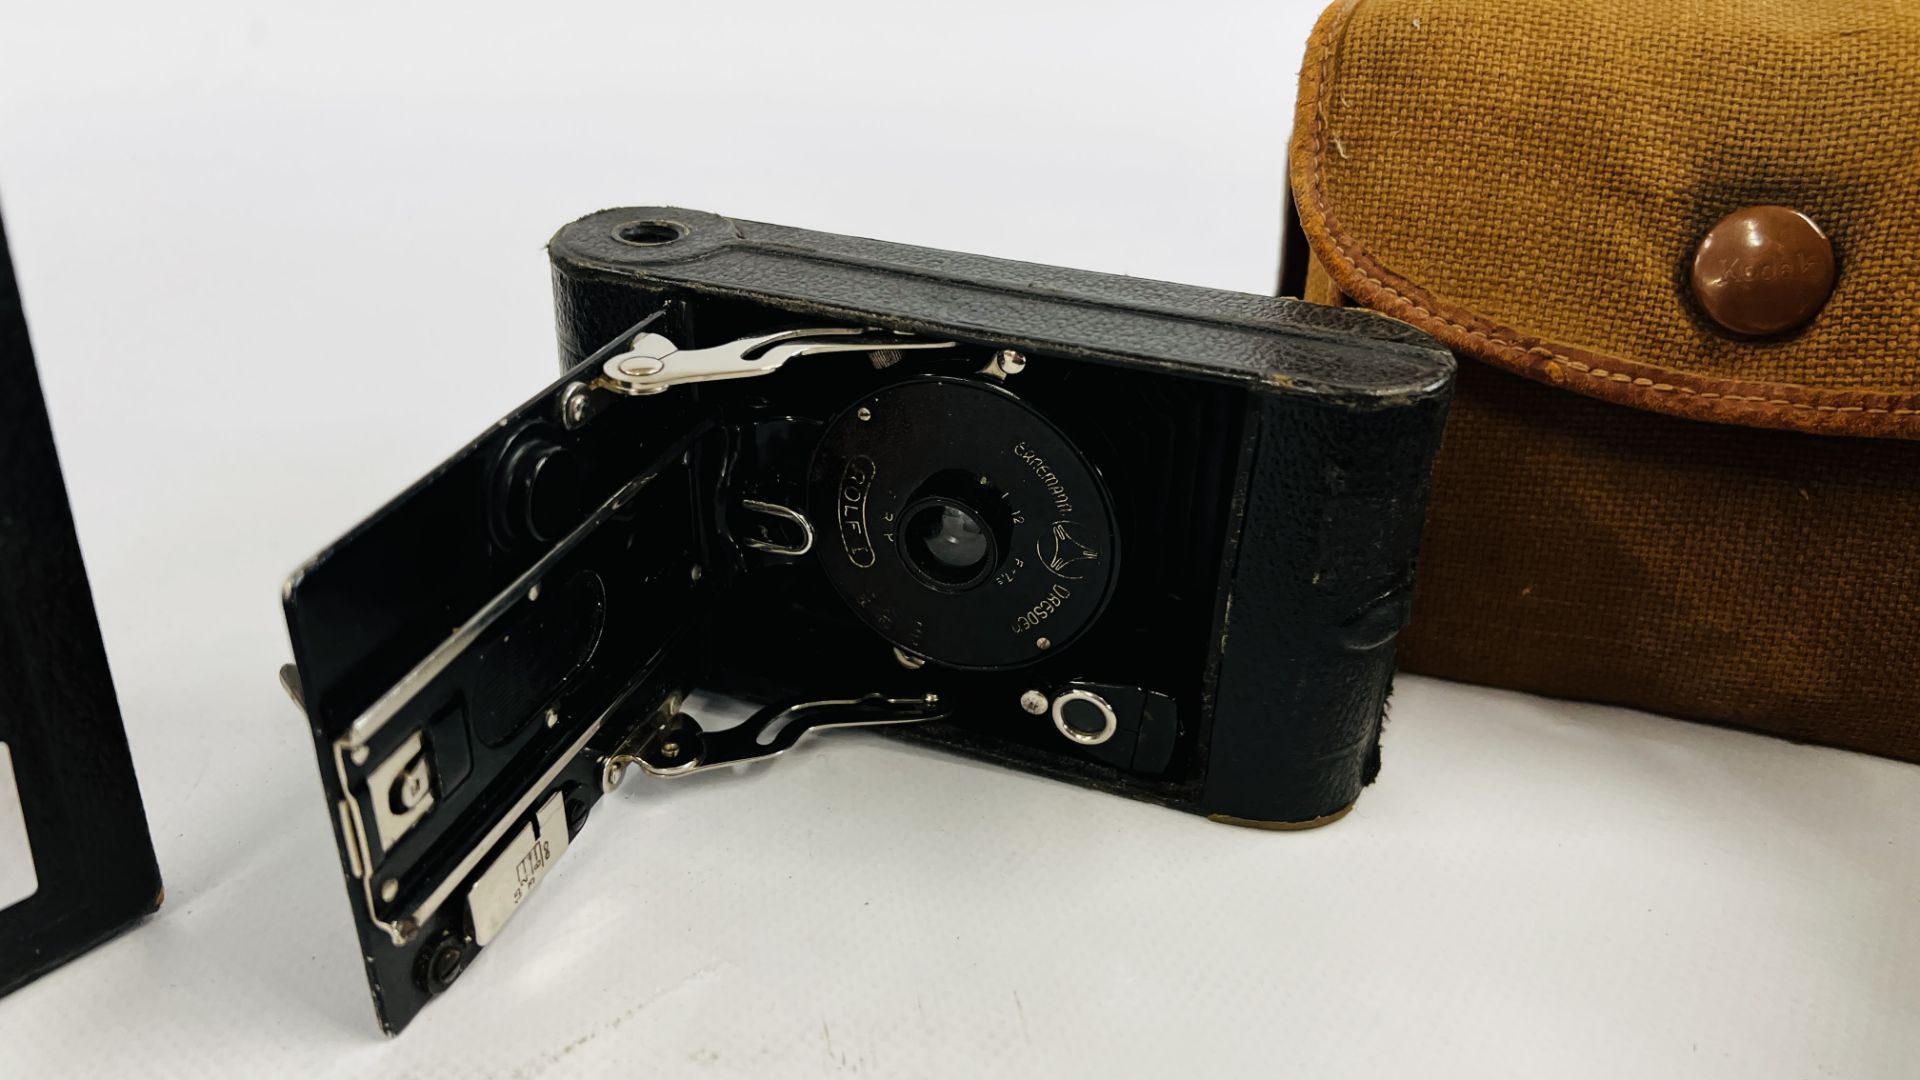 4 VINTAGE CAMERAS TO INCLUDE ERNEMANN ROLF I FOLDING CAMERA EIMIG CAMER, SIX-20 BROWNIE AND WARWICK. - Image 4 of 5